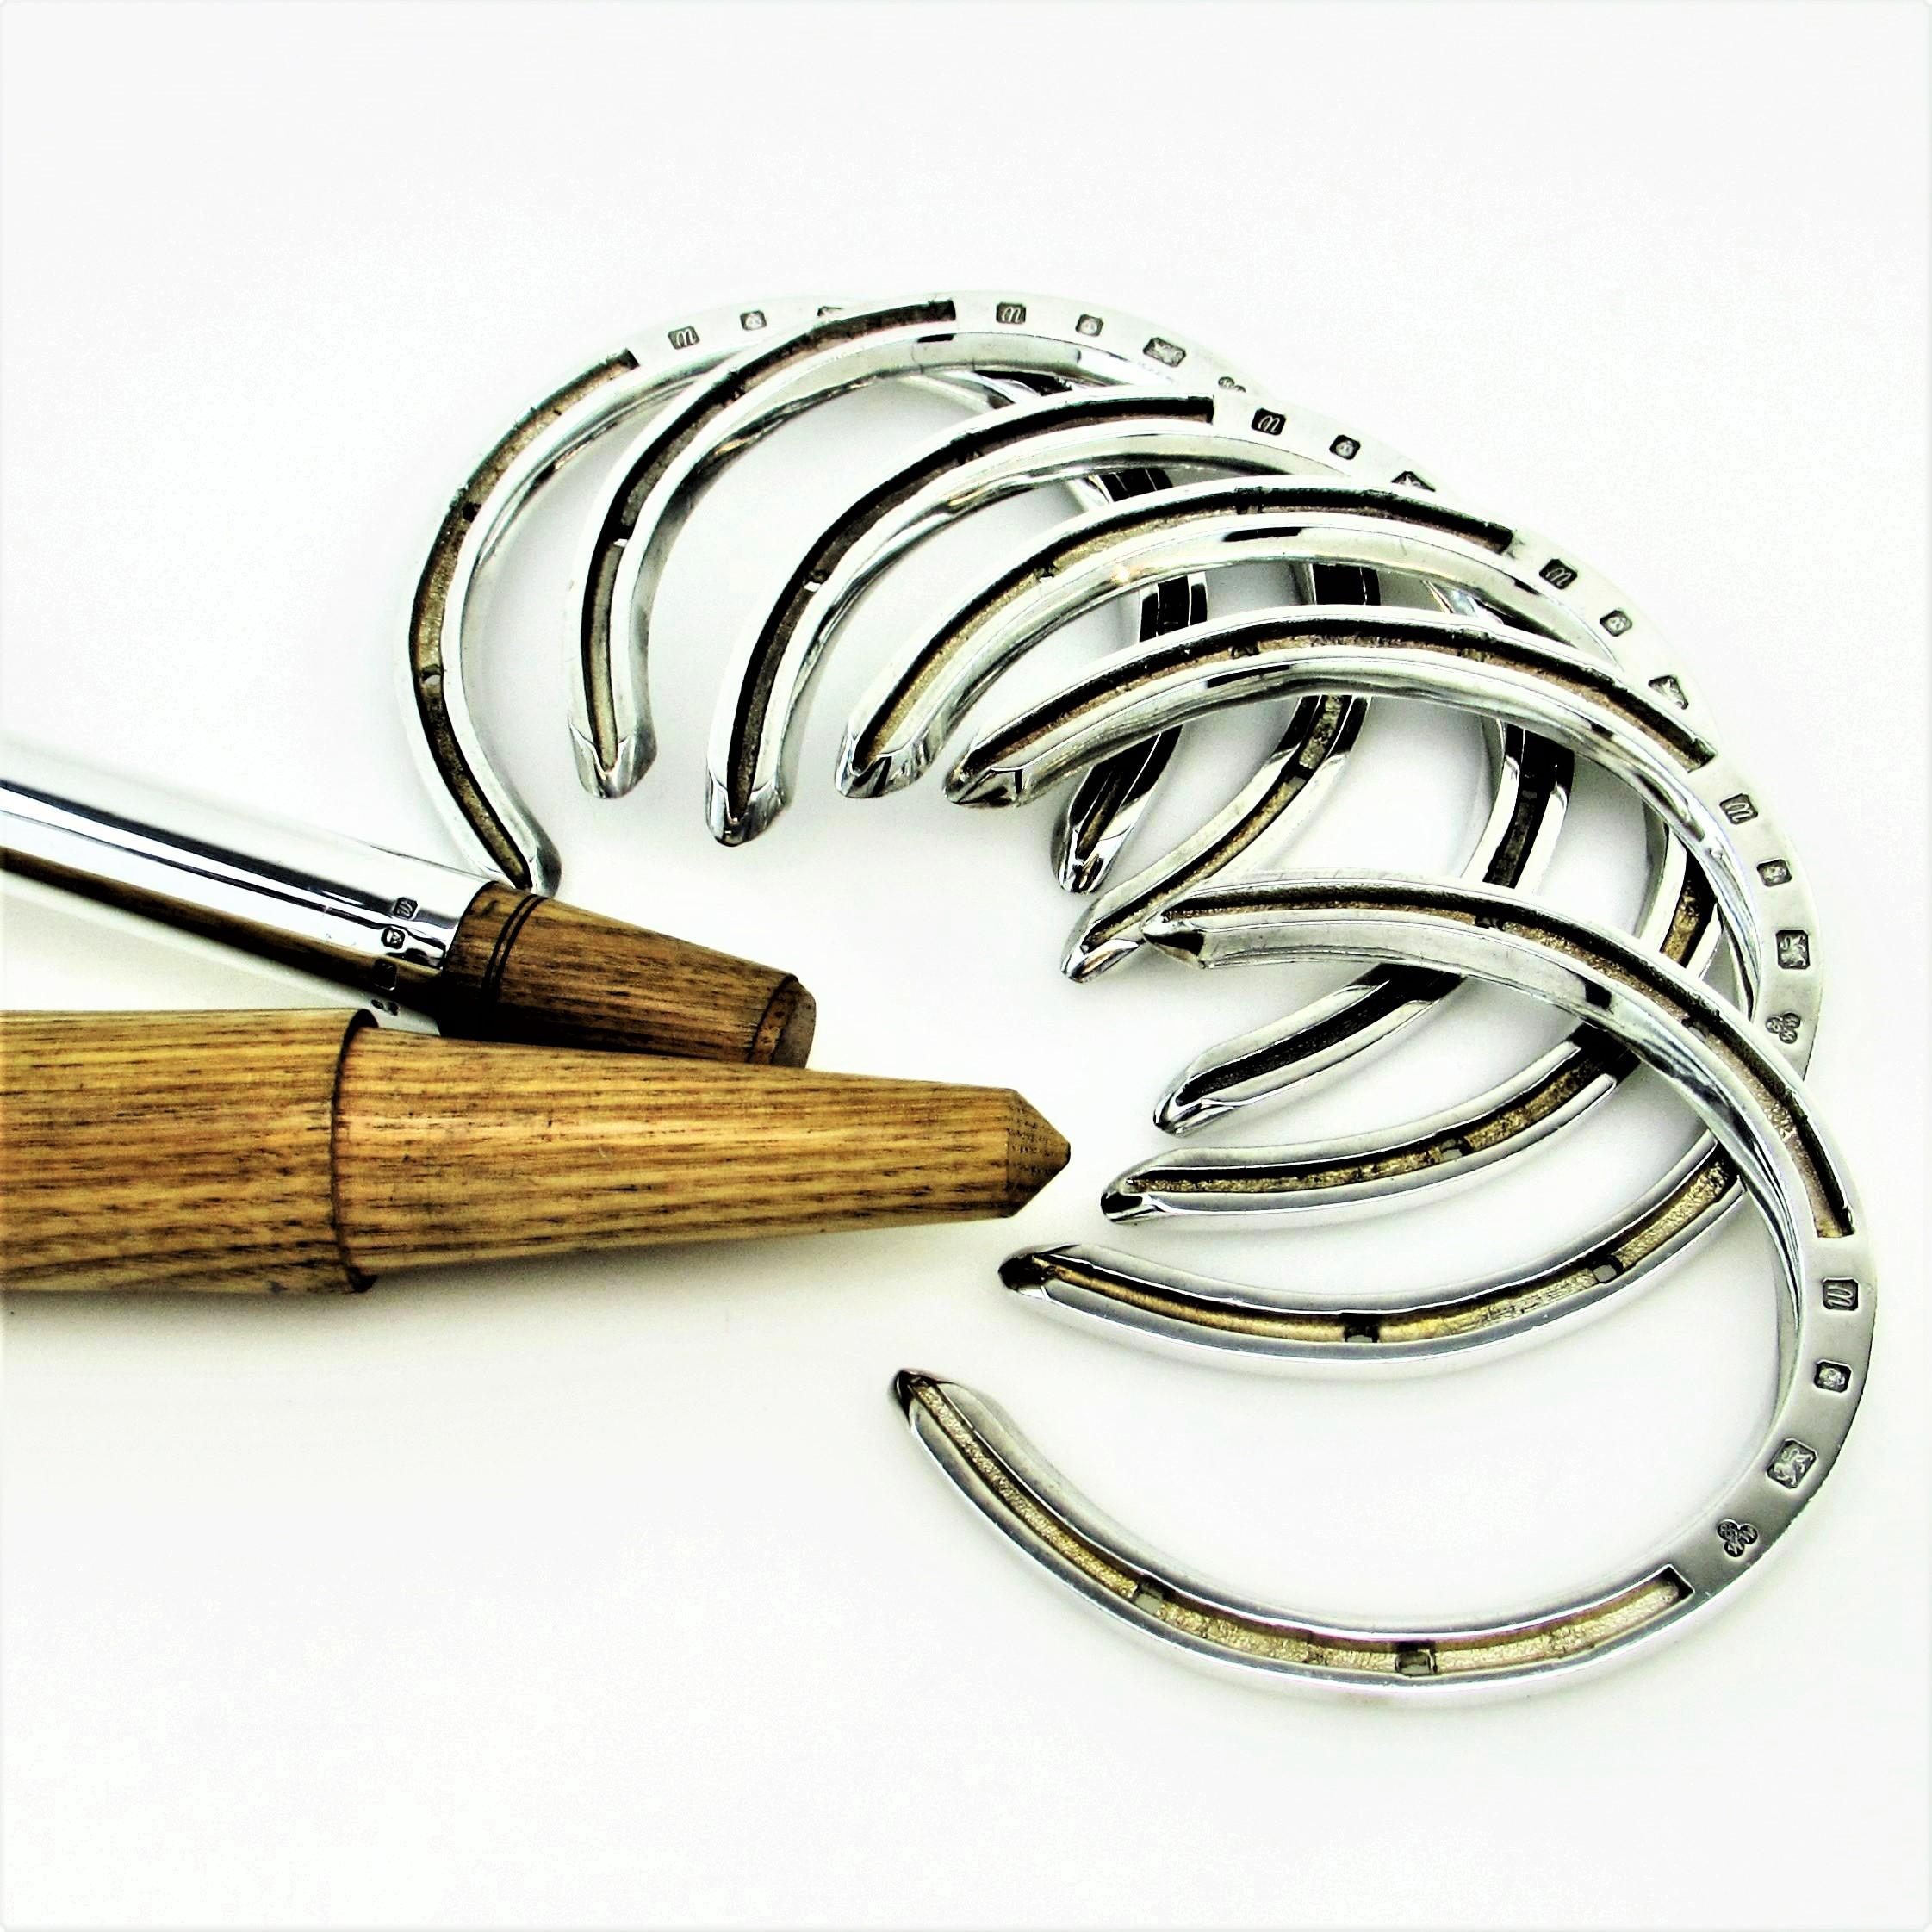 Sterling Silver & Wood Horseshoes Set Boxed 1996 Horse Shoe Toss Game Set 2